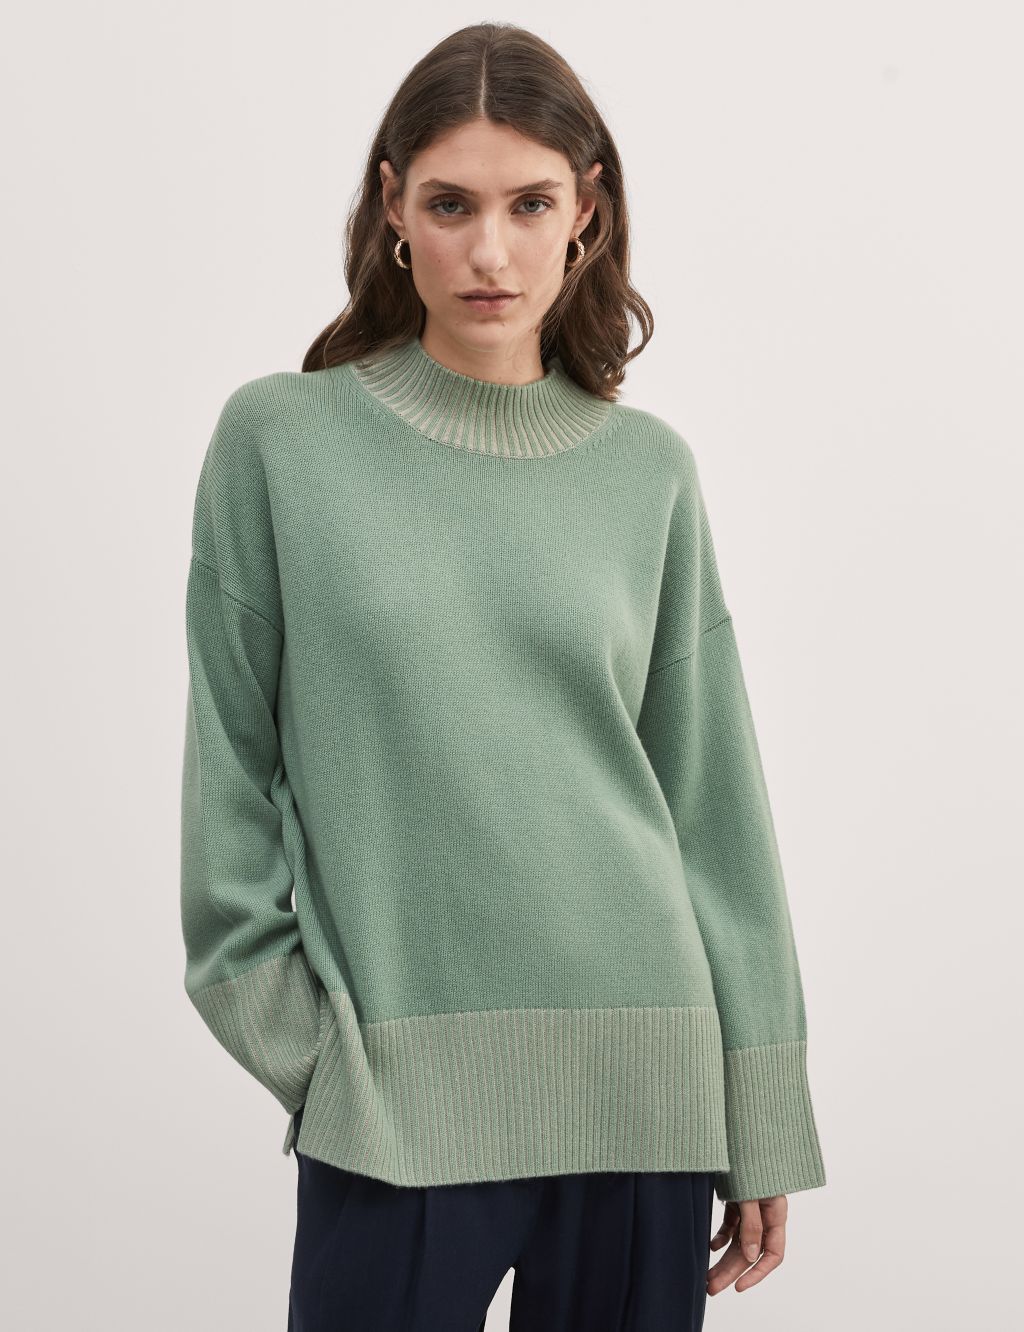 Wool Rich Funnel Neck Jumper with Cashmere image 5